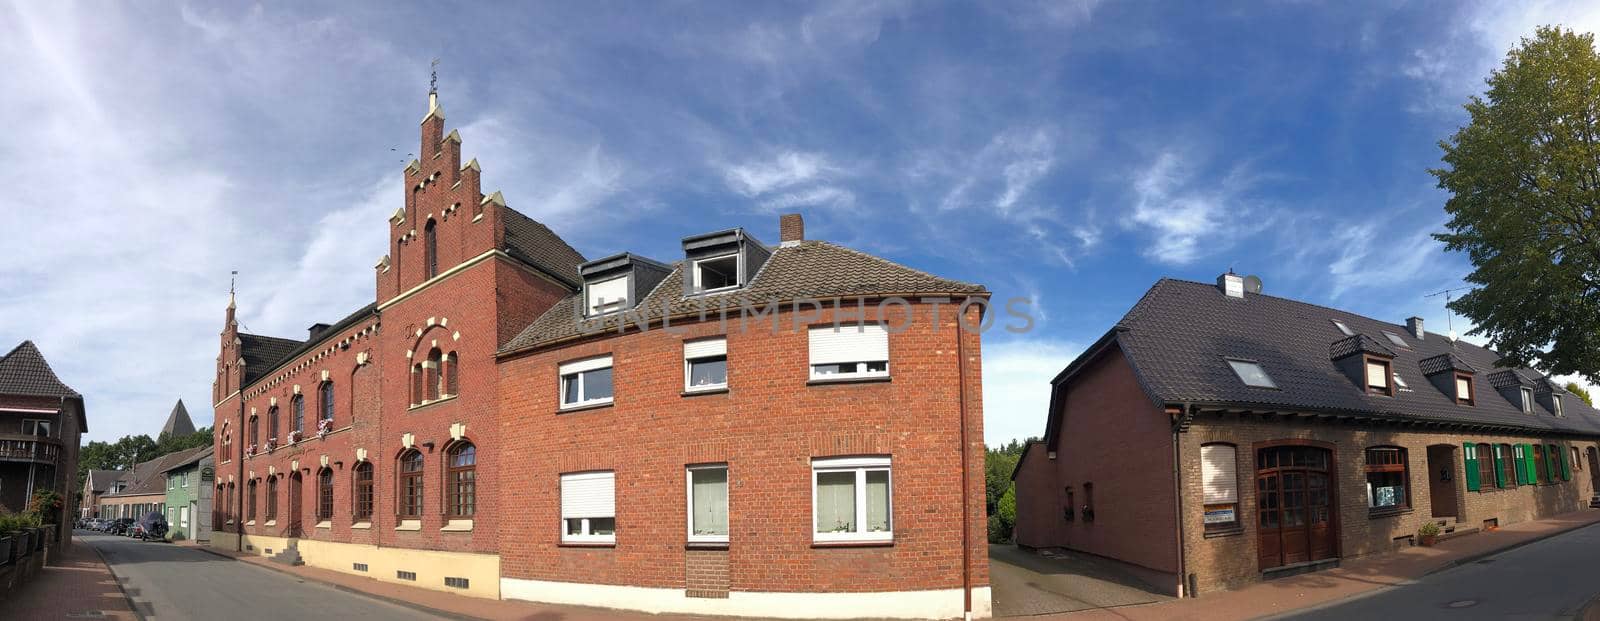 Panorama from a street in Ringenberg, Germany